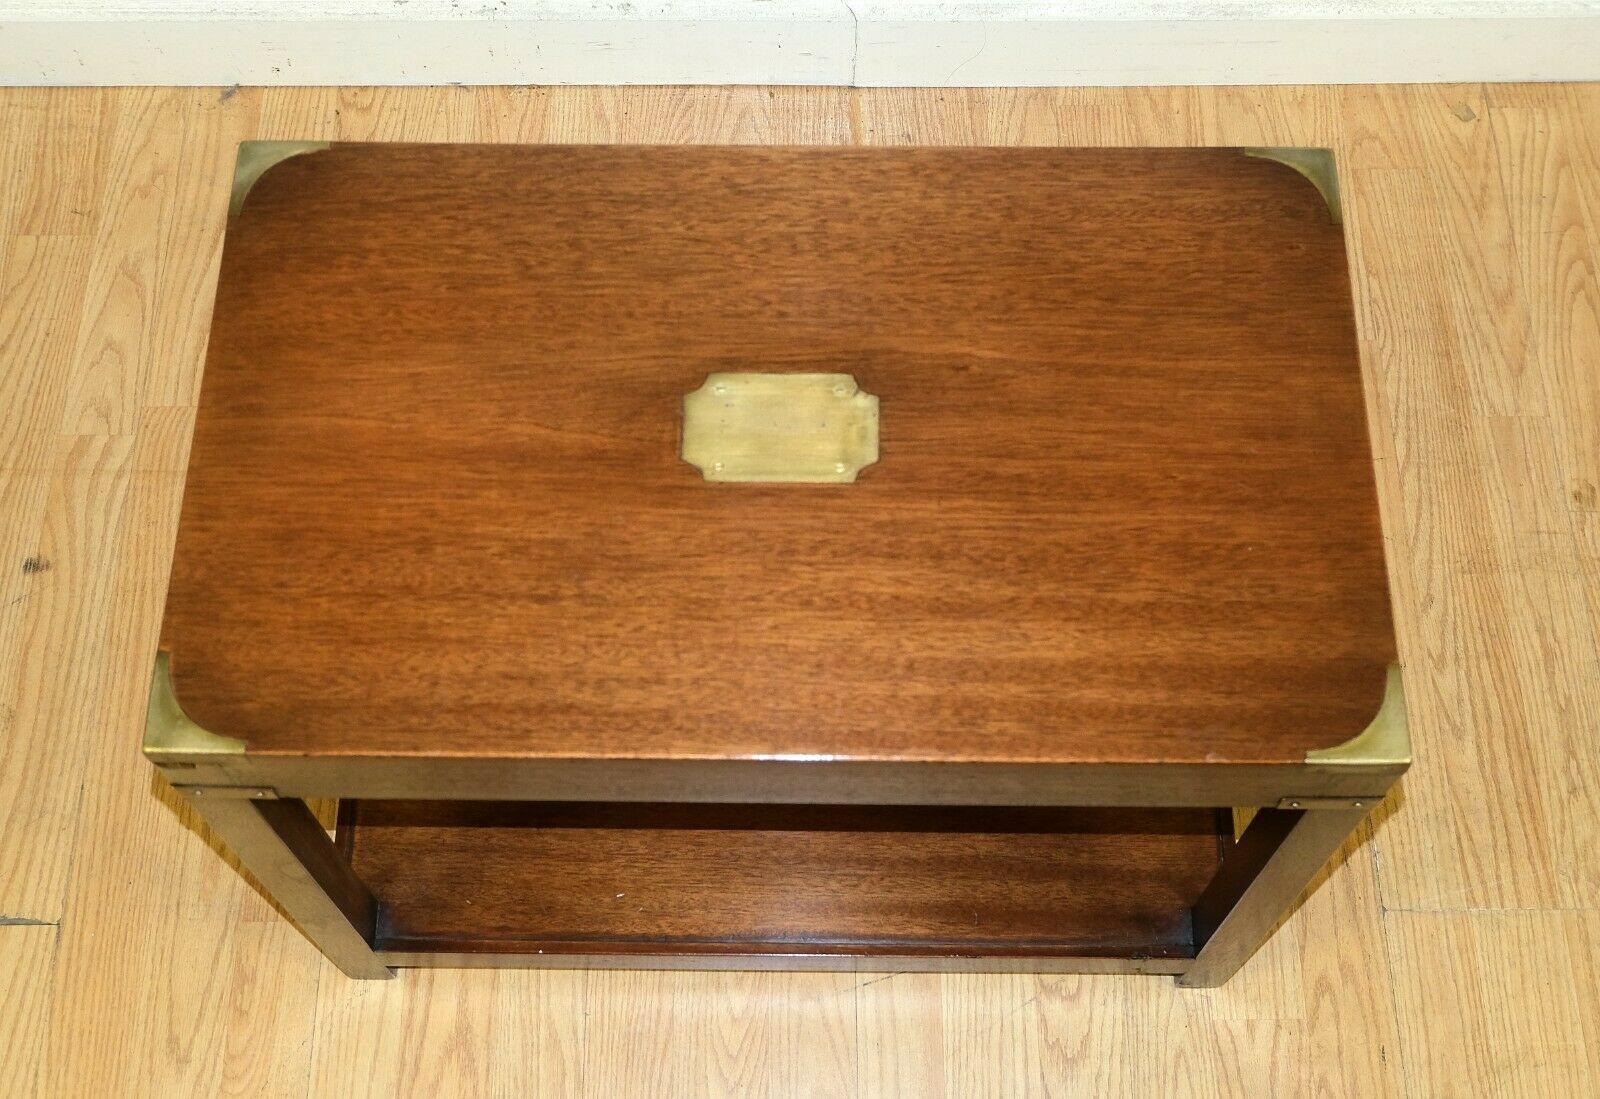 Hand-Crafted Kennedy Military Campaign Brown Hardwood Side/Coffee Table Brass Inset on Top